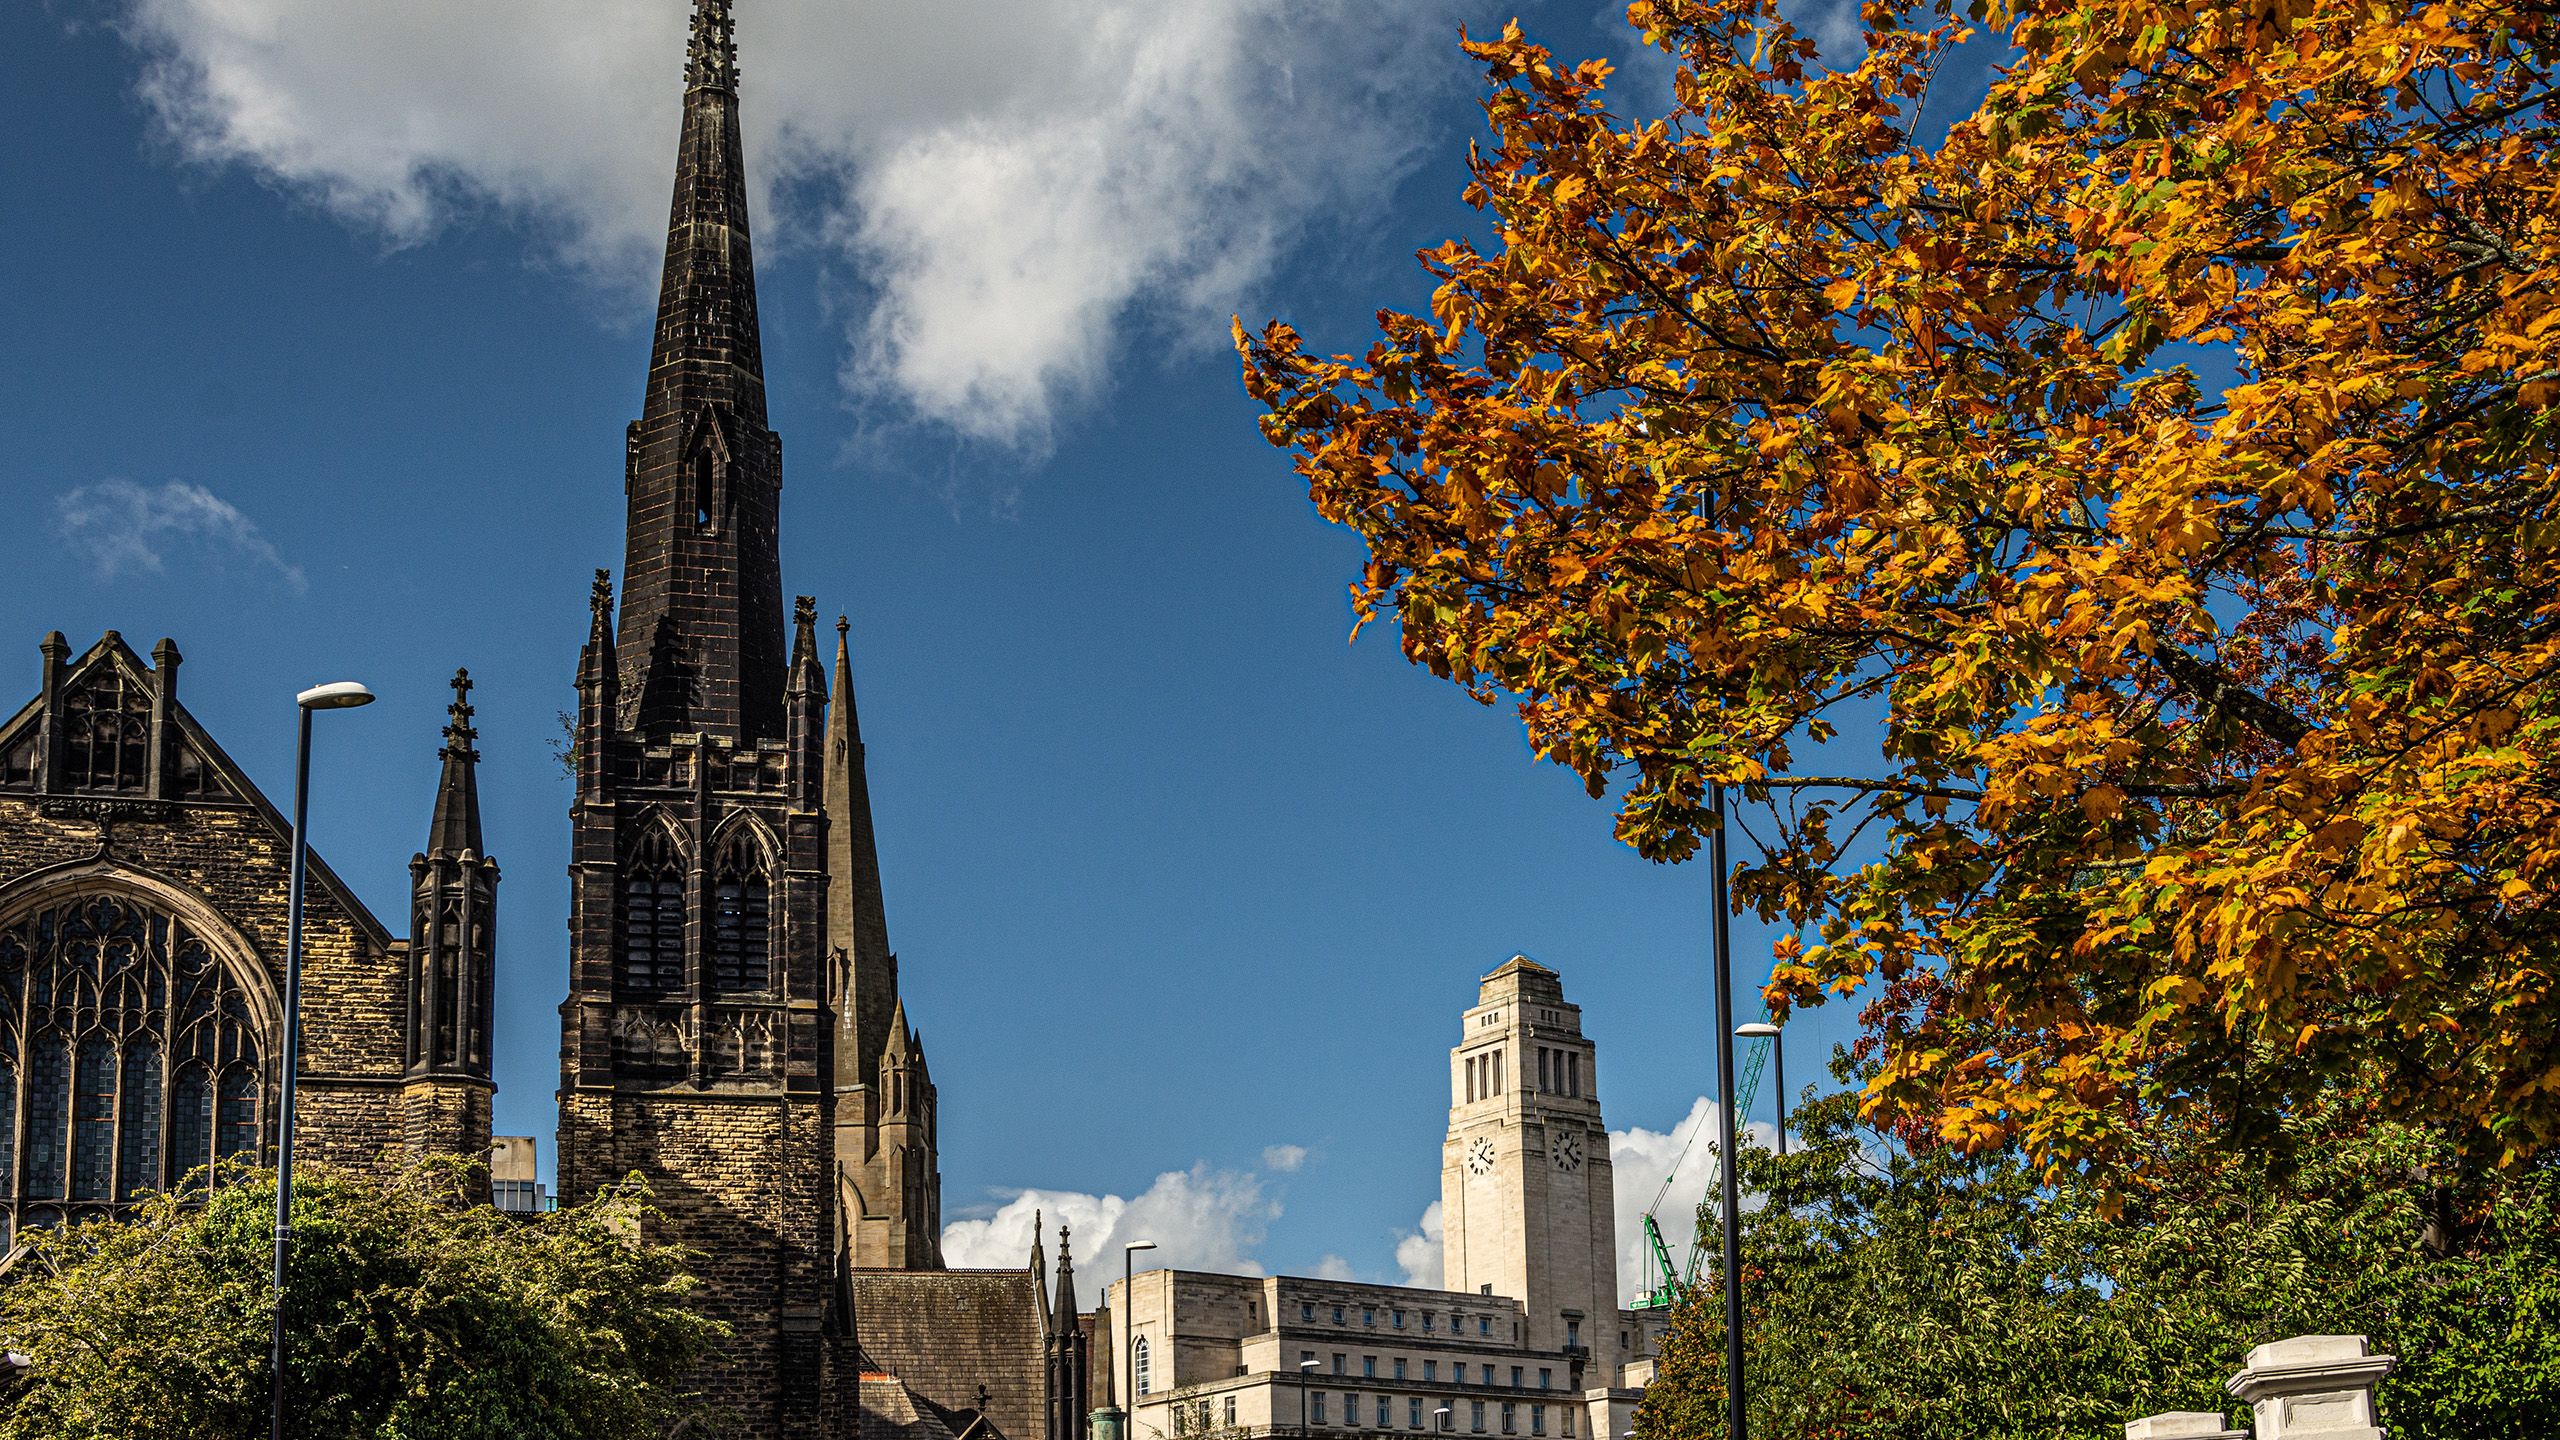 The Parkinson Building, a former church and a tree with orange leaves